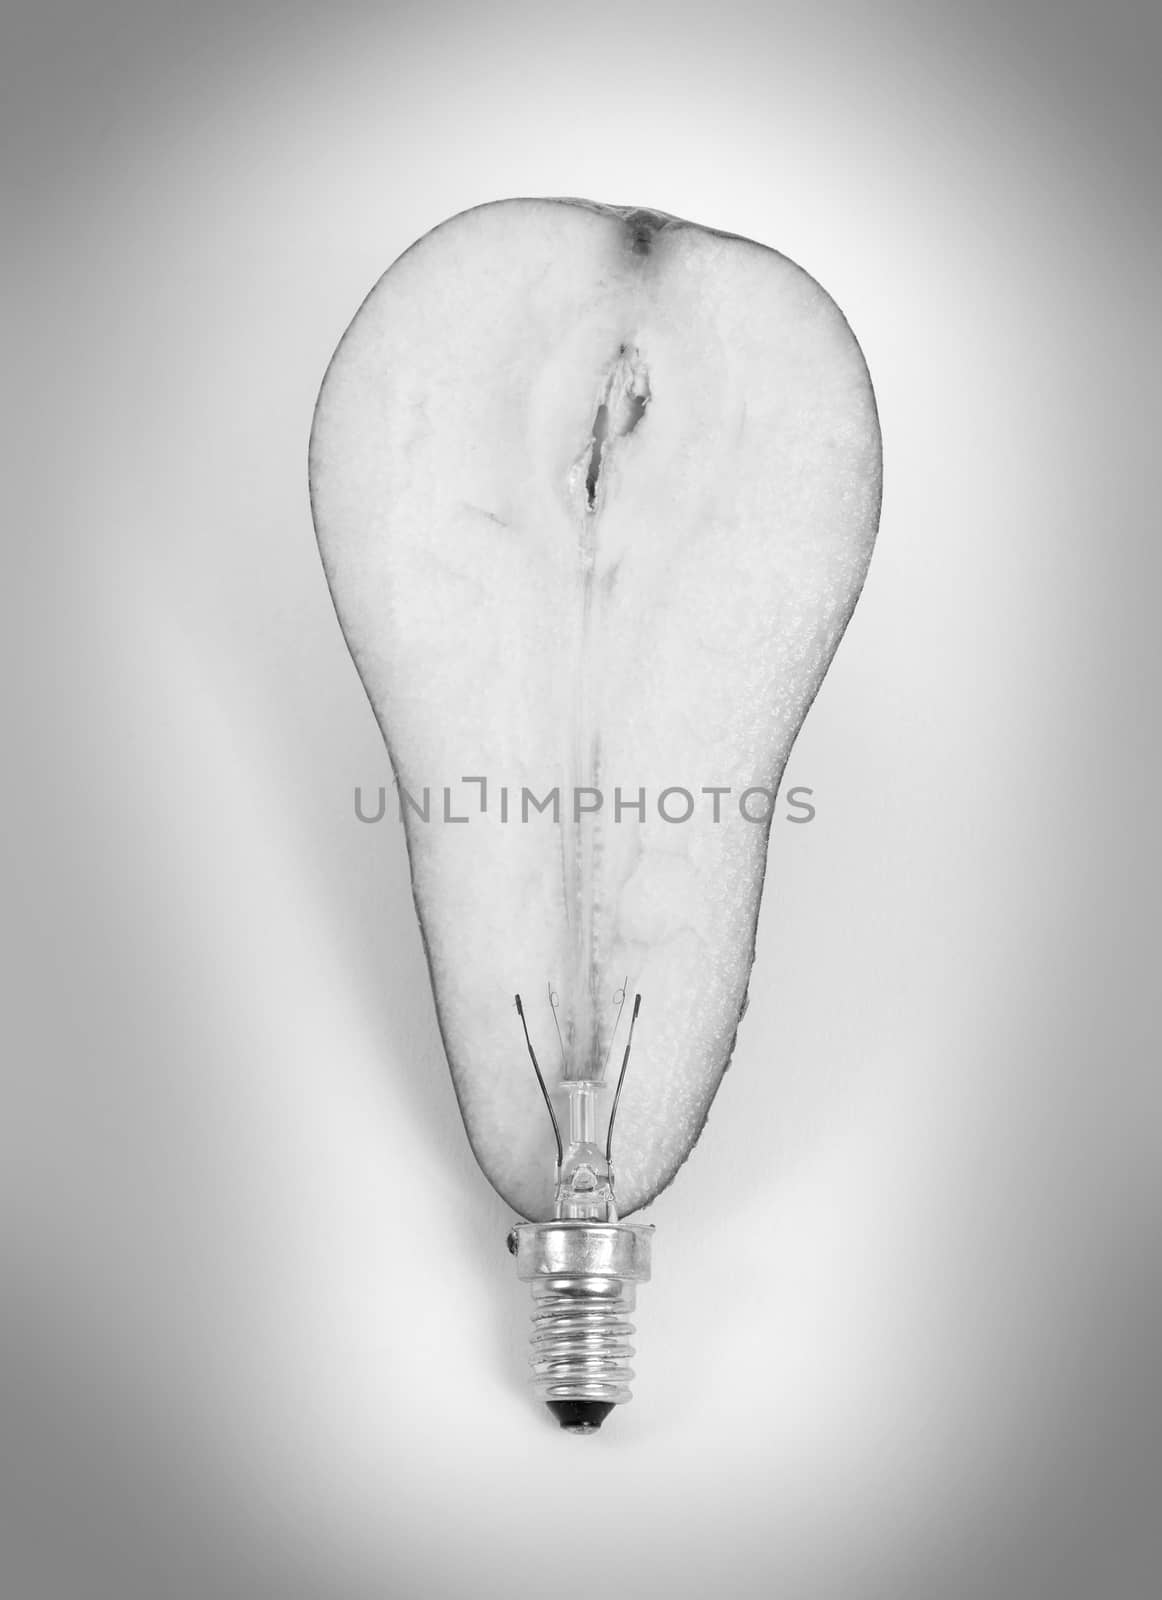 Light bulb made out of a pear by michaklootwijk